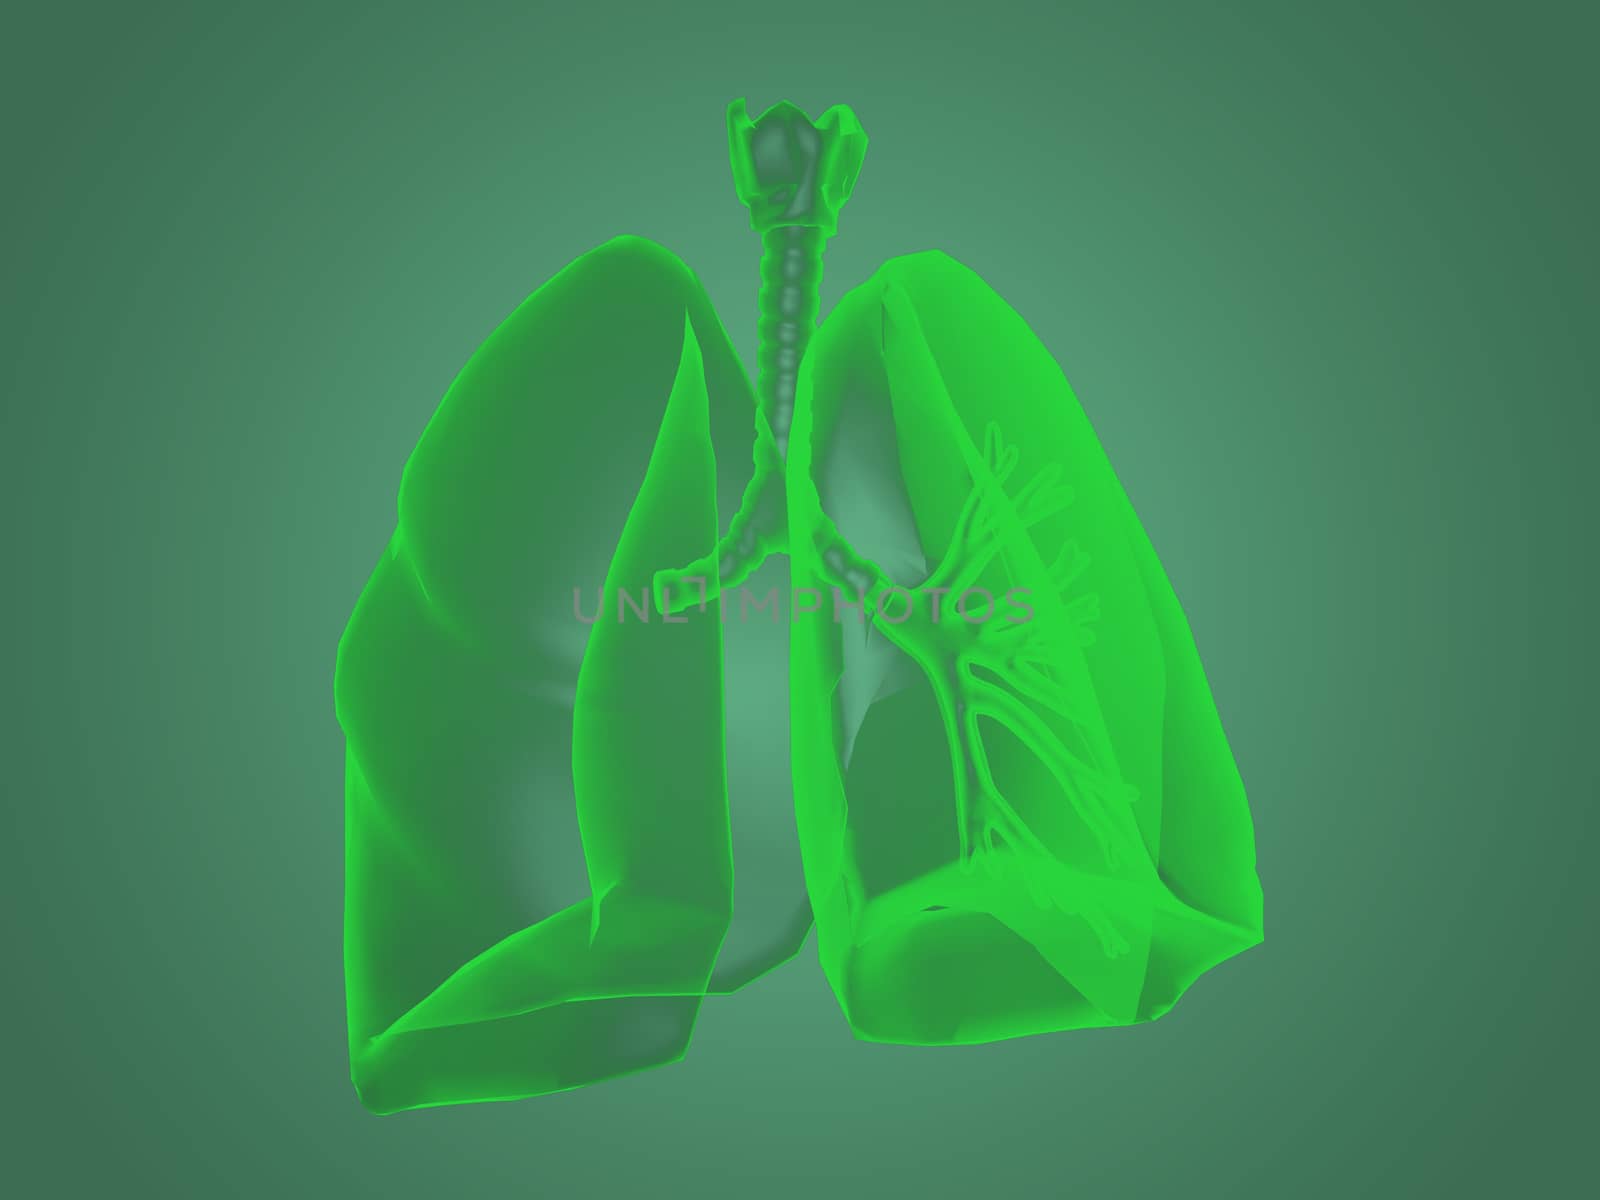 X-ray Lungs anatomy by teerawit